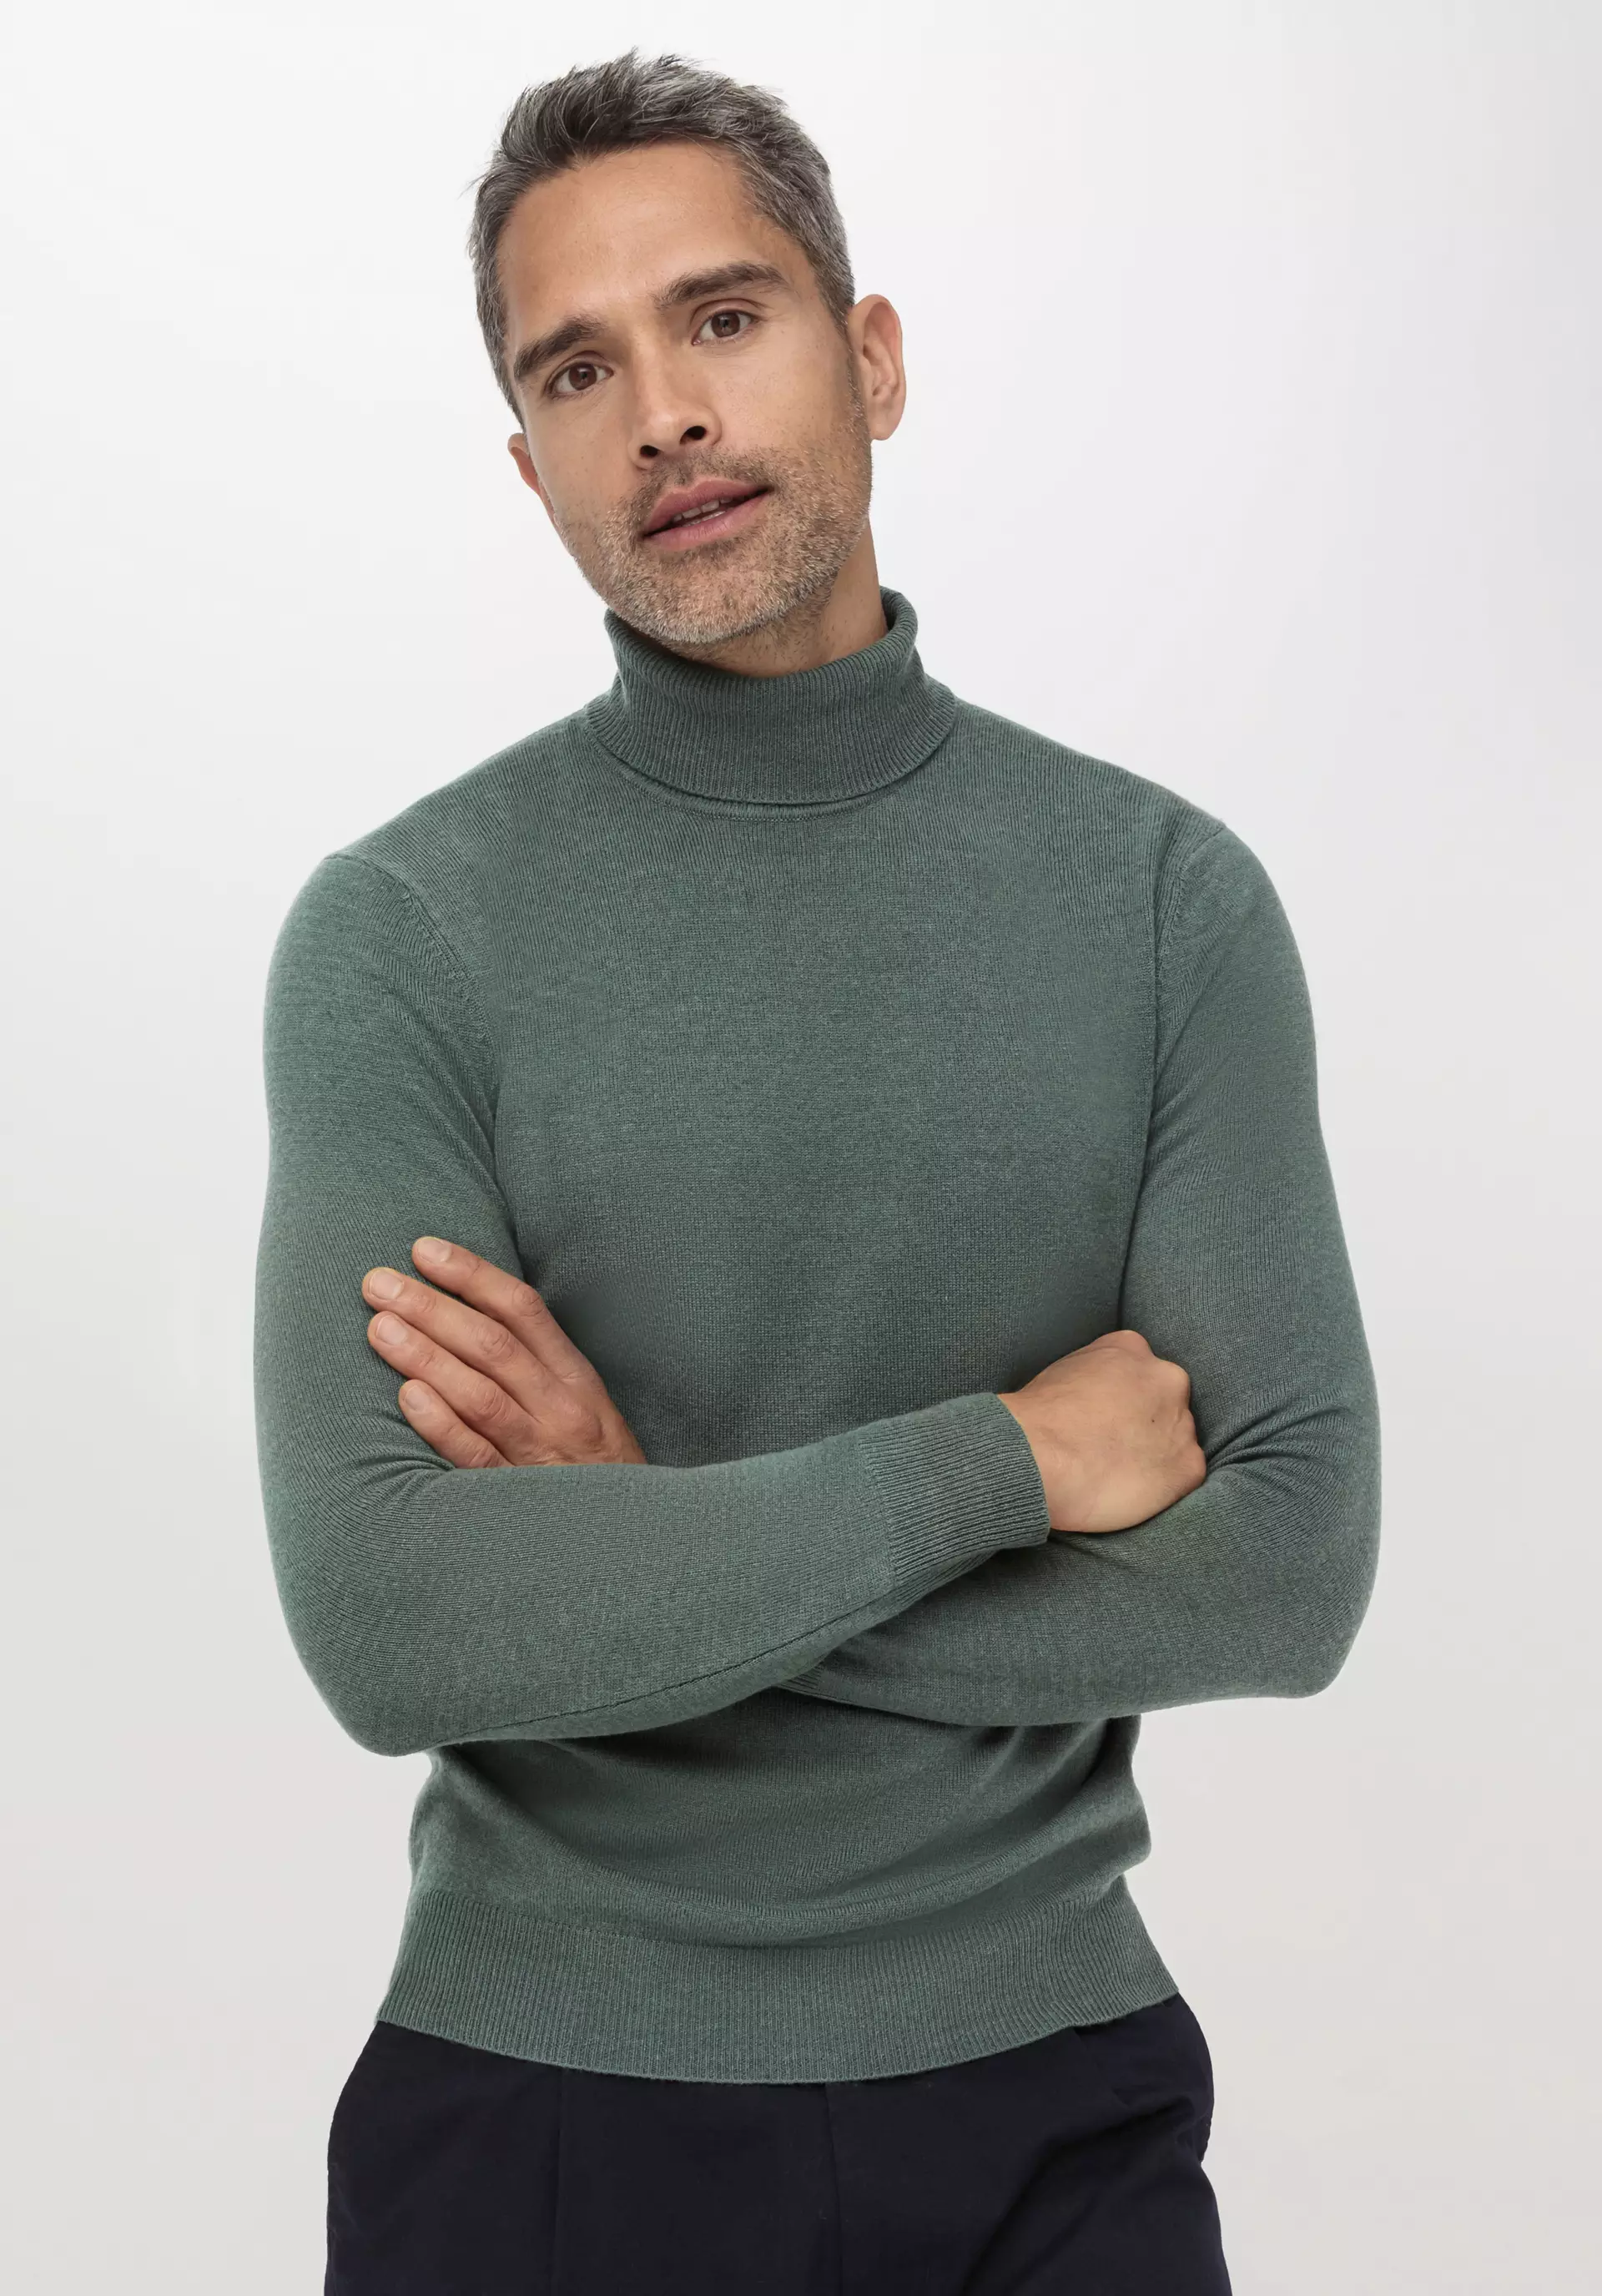 Turtleneck sweater made cashmere virgin wool 48904 with of